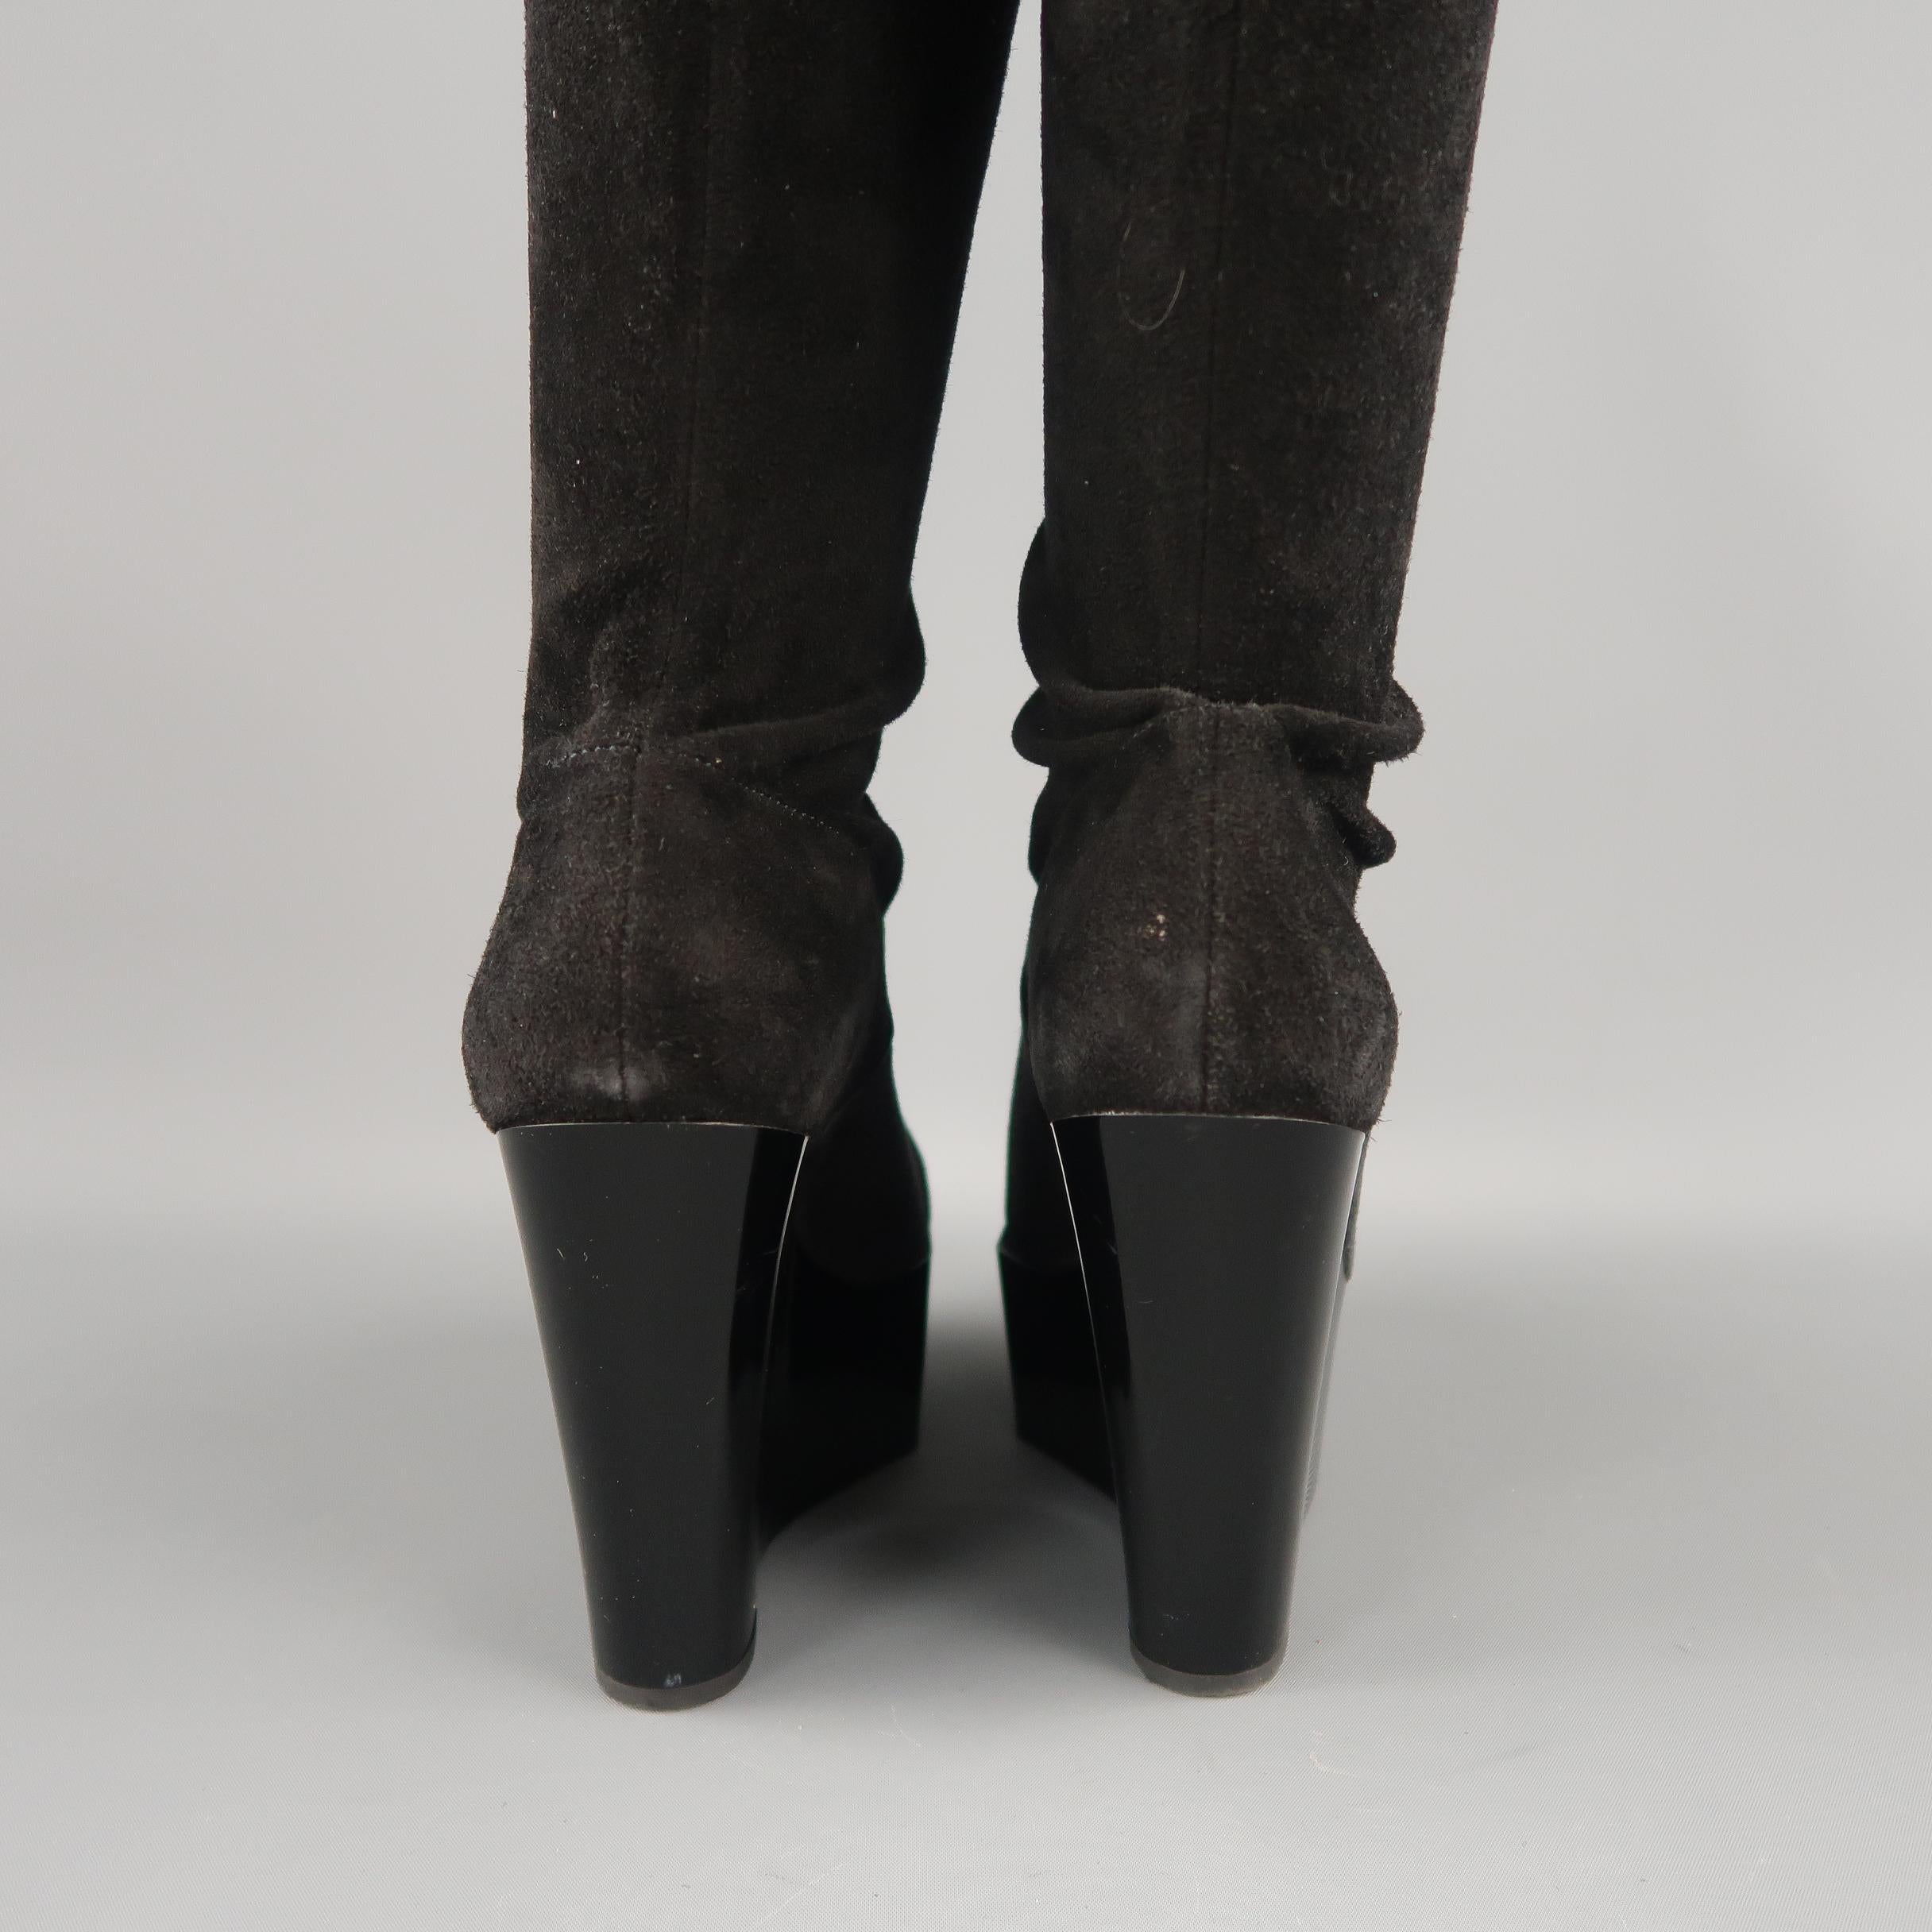 ROBERT CLERGERIE Size 5 Black Suede Lacquared Platform Wedge Thigh High Boots 2